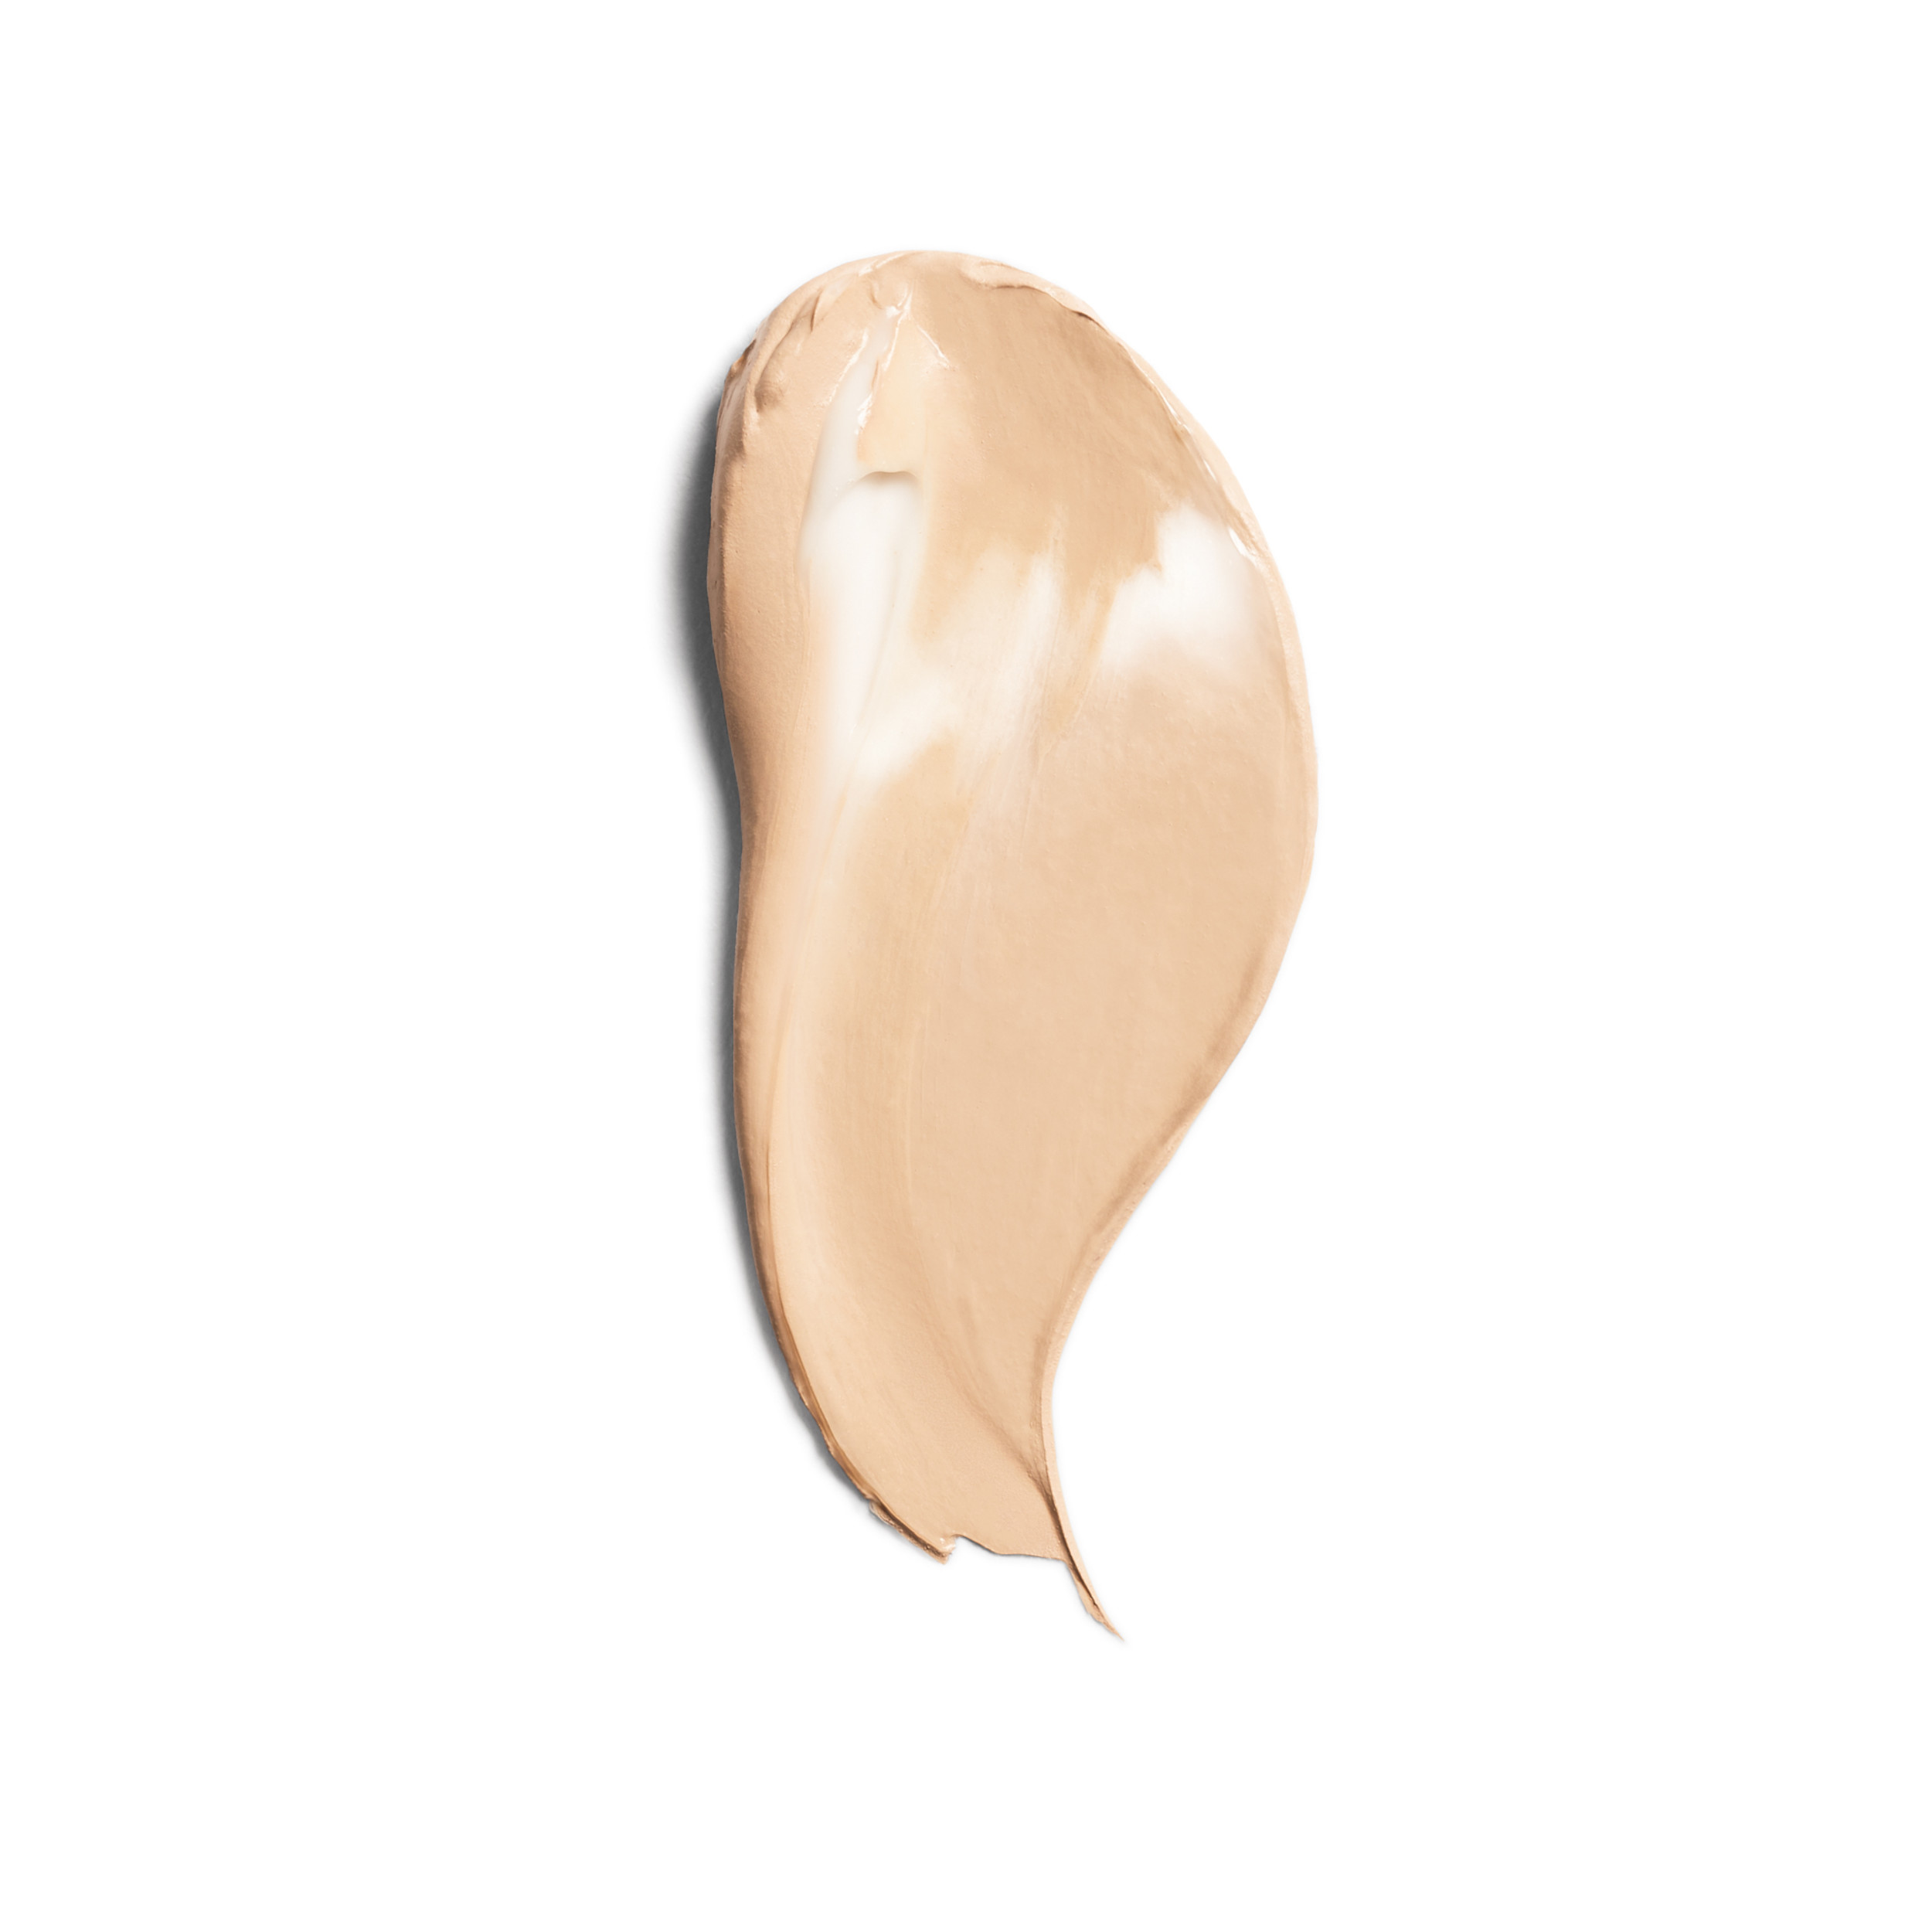 COVERGIRL + OLAY Simply Ageless Instant Wrinkle-Defying Foundation with SPF 28, Classic Ivory, 0.44 oz - image 3 of 9